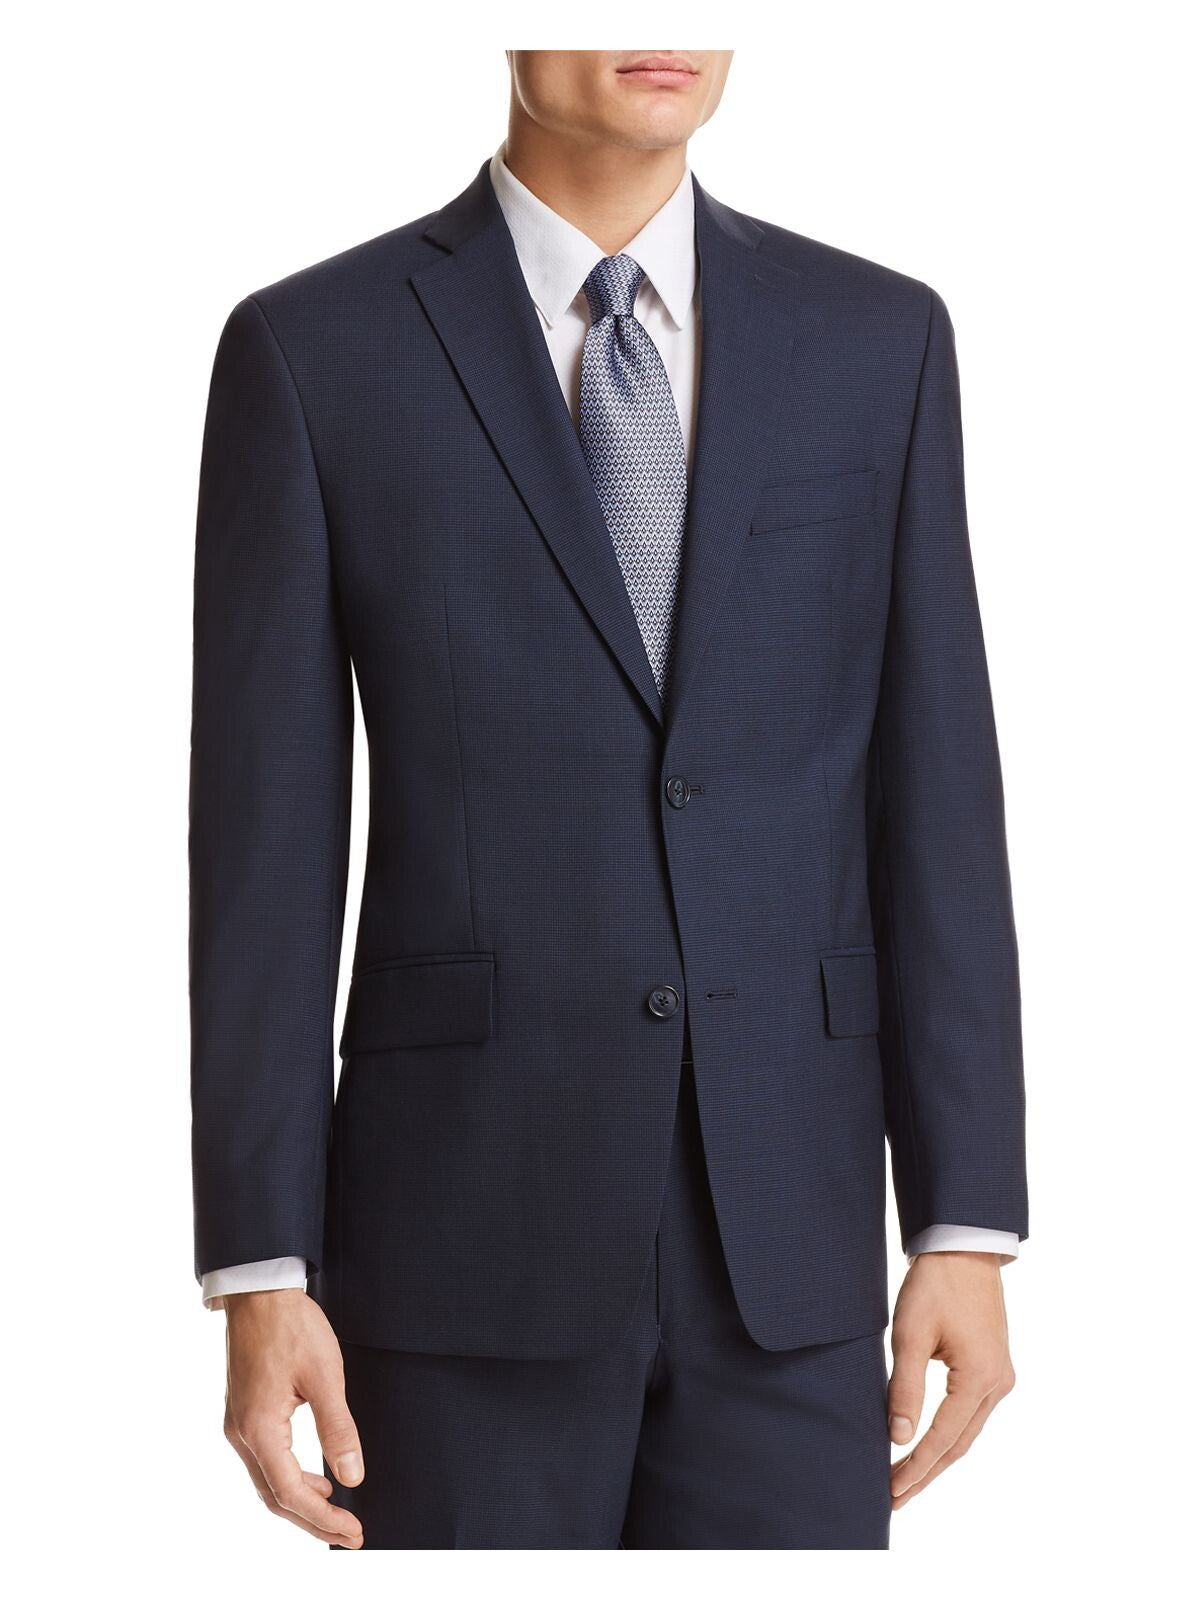 MICHAEL KORS Mens Navy Single Breasted, Stretch, Classic Fit Wool Blend Suit Separate Blazer Jacket 40S